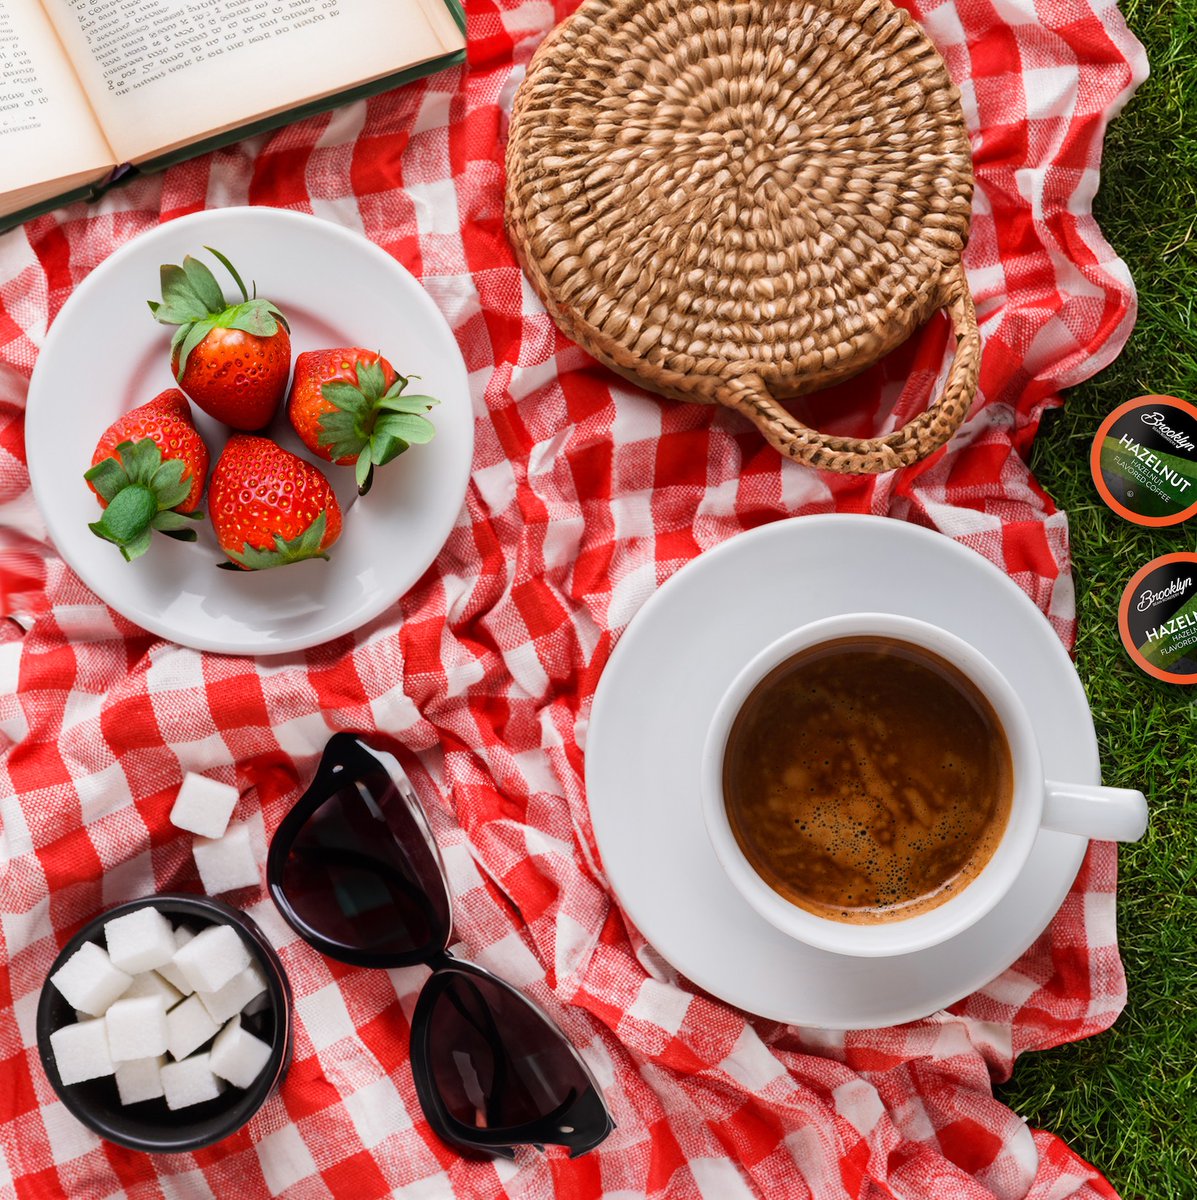 Let BBR coffee be the perfect companion for your picnic. Sip, savor, and soak in the joy of outdoor moments ☕🌲🌳

#CoffeeBreak #NYCCoffee #NewYork #CoffeeLover #CoffeeGram #Cafe #Hazelnut #Picnic